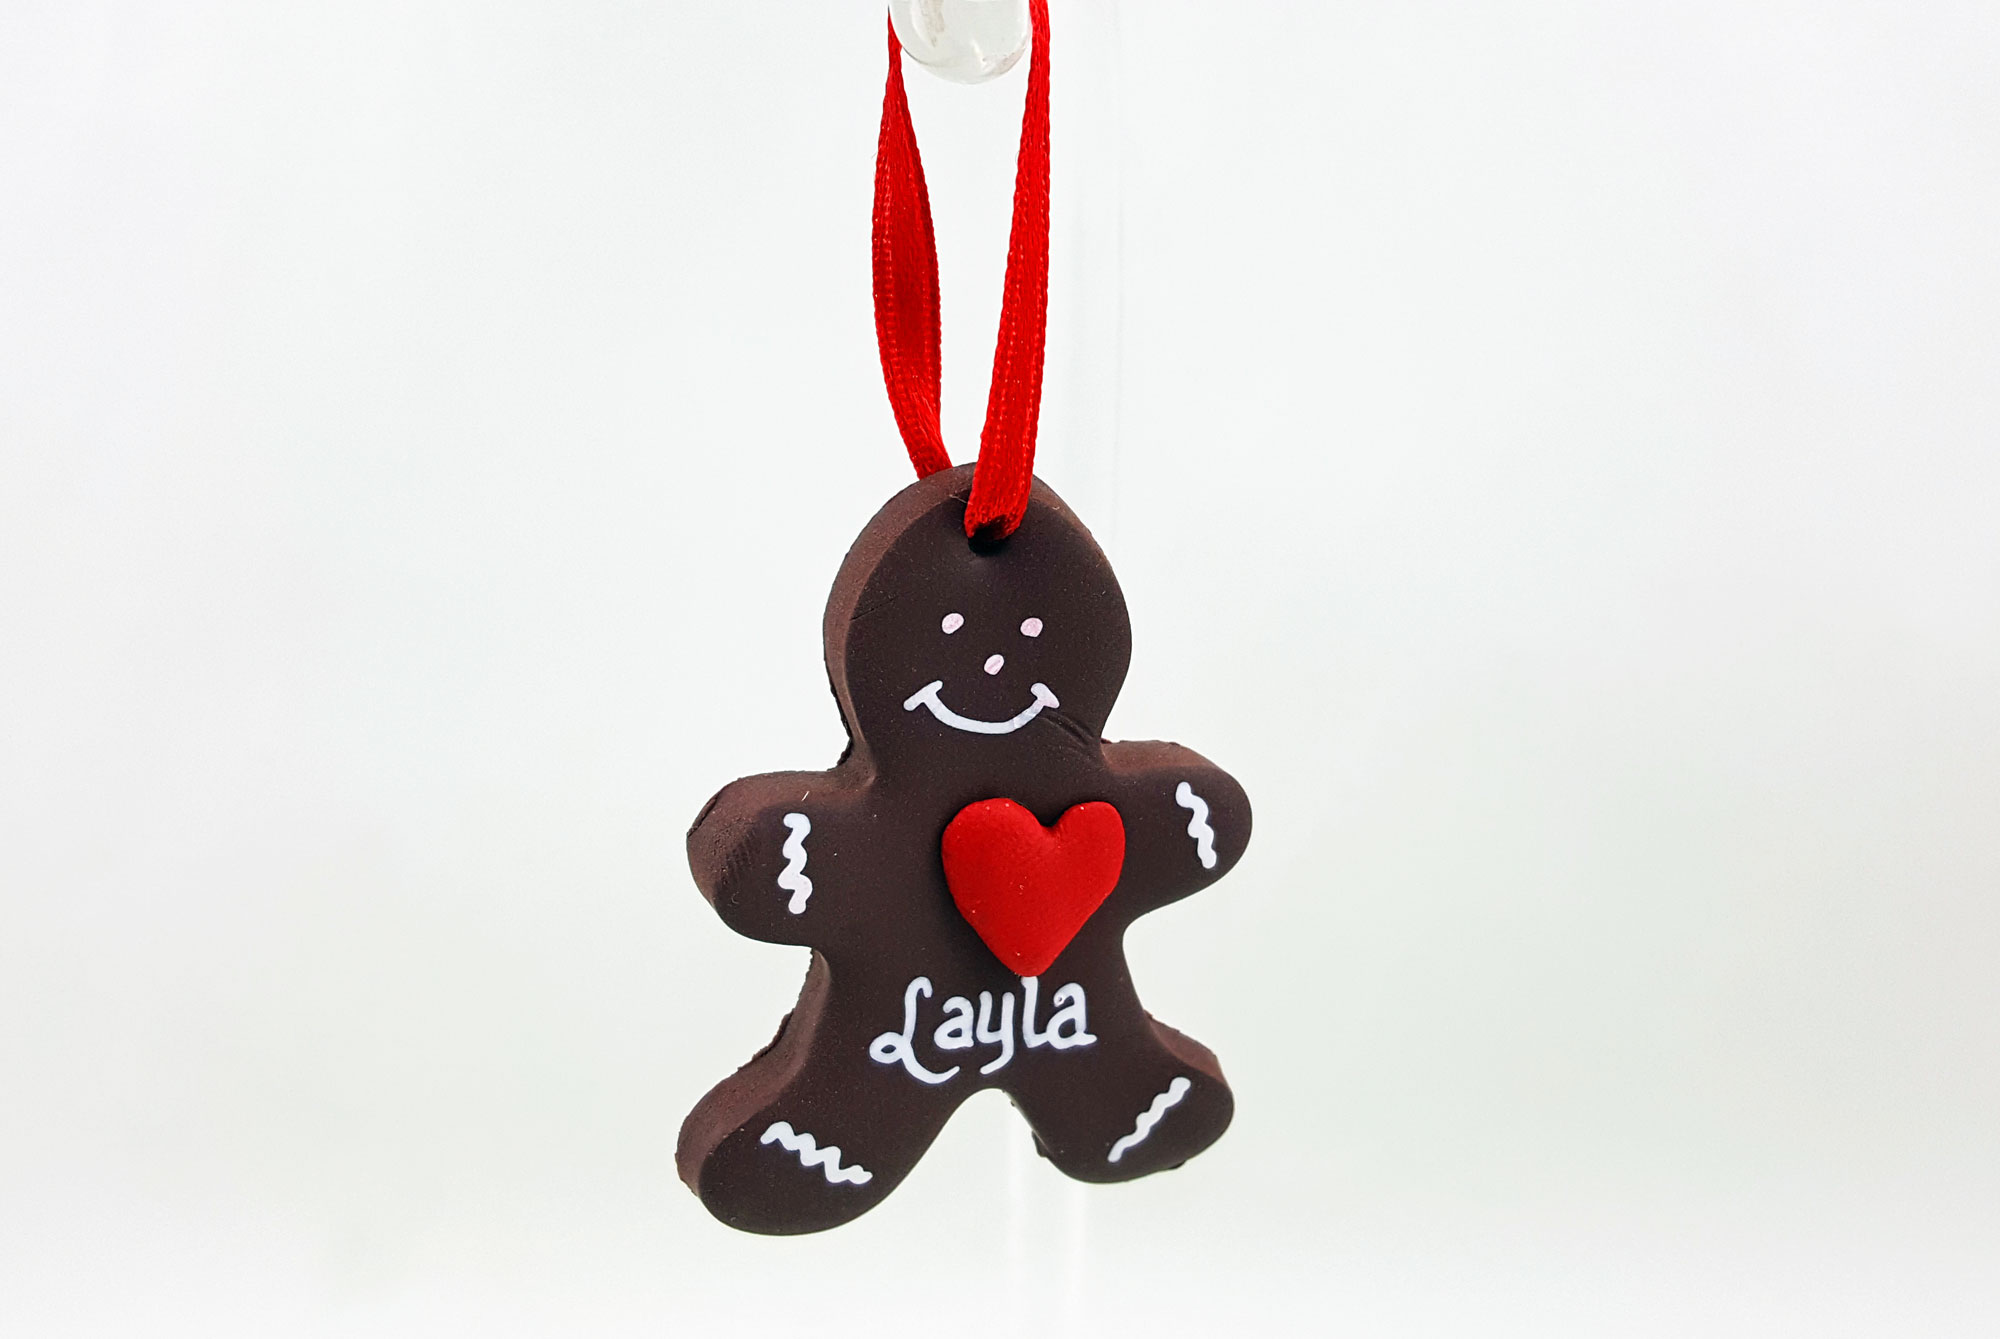 A DIY gingerbread man ornament with a red heart and white features, hung with a red ribbon | Ornamentshop.com